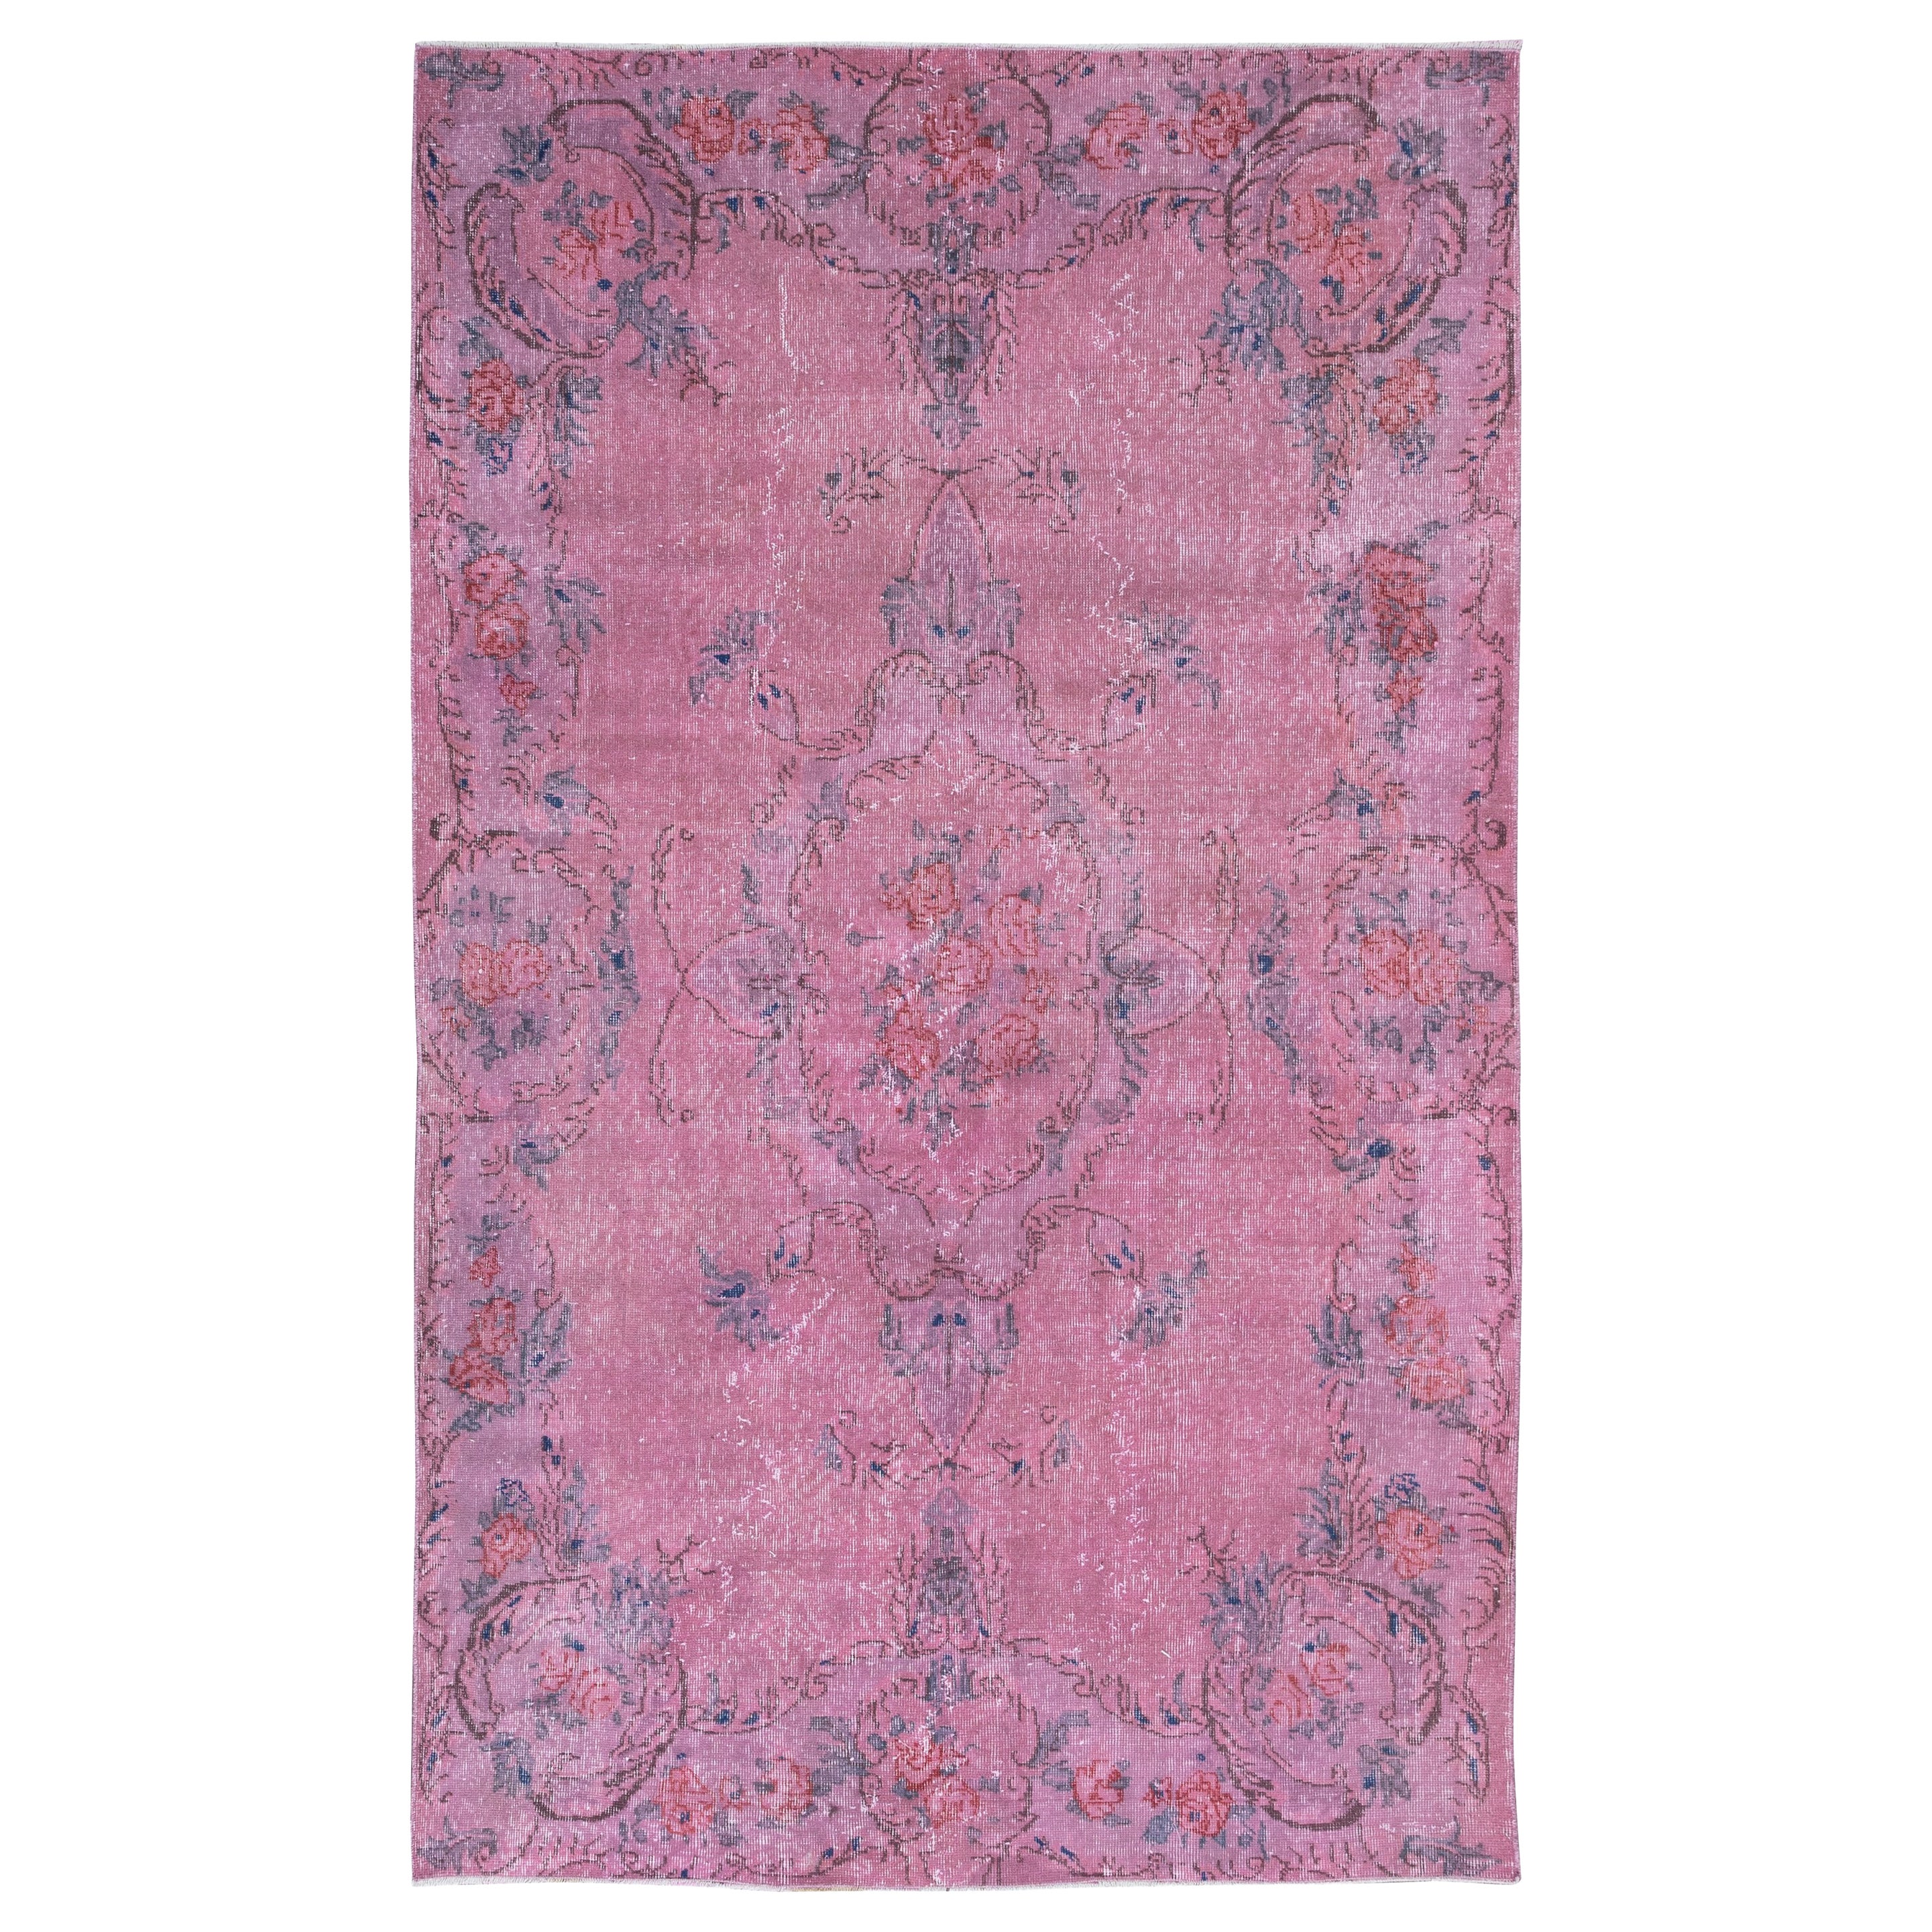 5.4x8.8 Ft Contemporary Handmade Turkish Floral Pattern Area Rug in Soft Pink For Sale